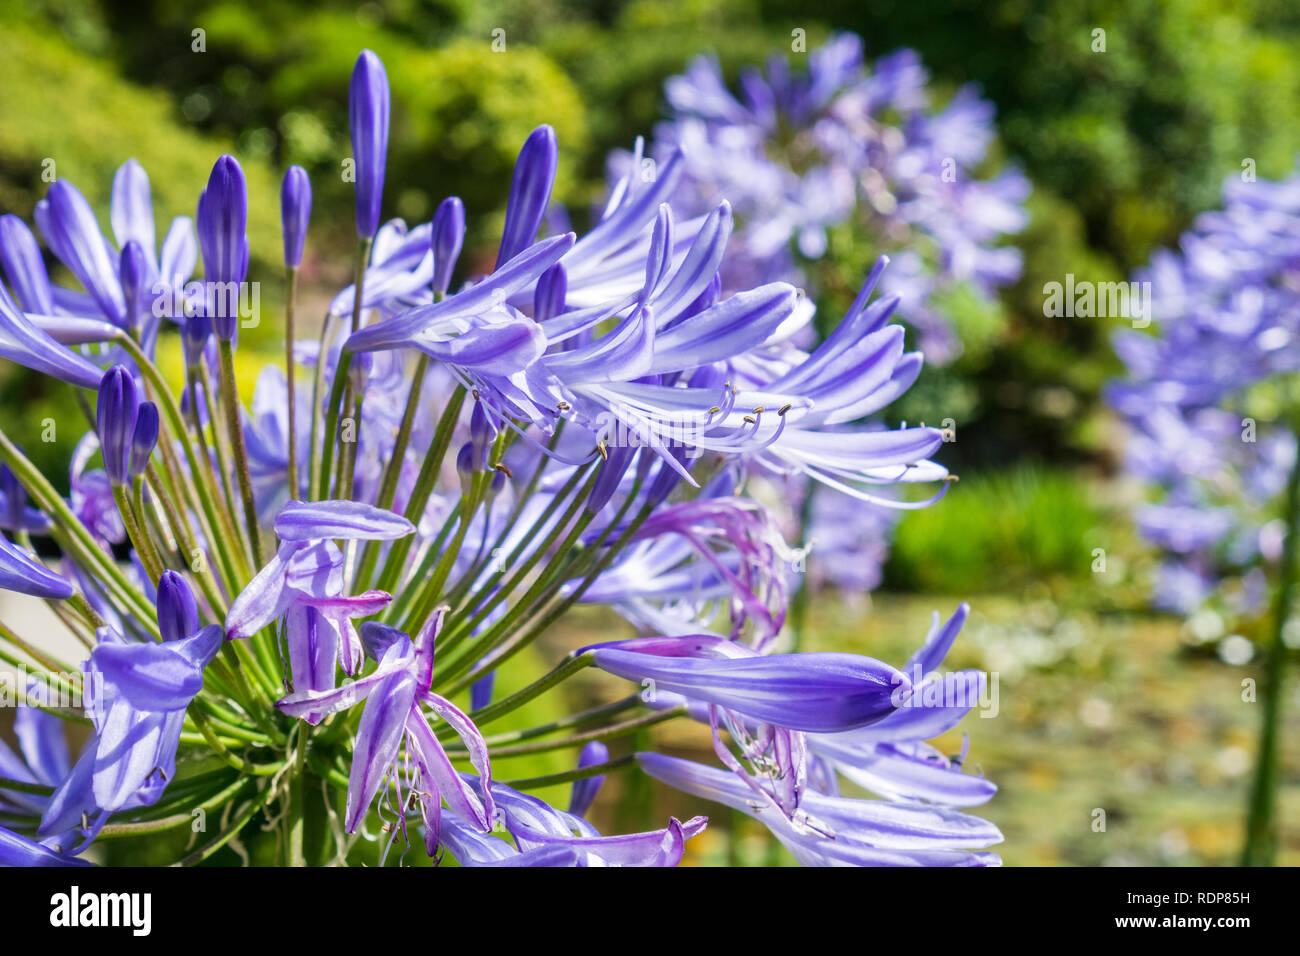 Close up of Lily of the Nile (Agapanthus) flowers used for landscaping Stock Photo